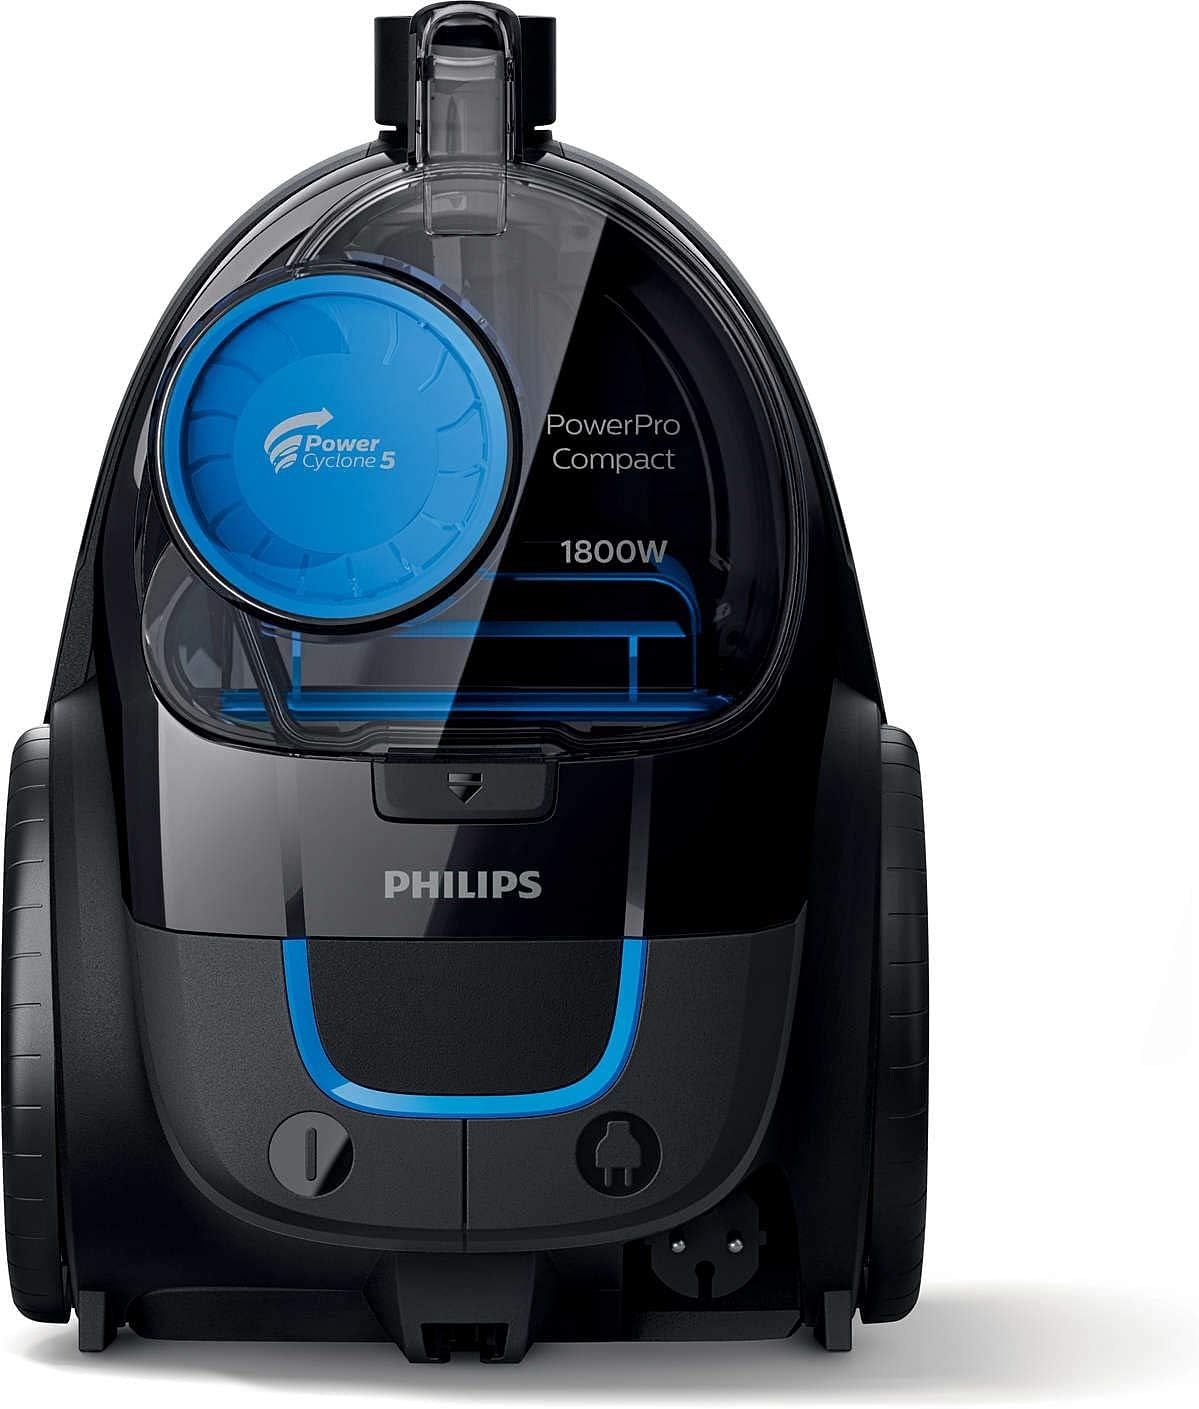 Philips PowerPro Compact 1800W, 360W suction power, Power Cyclone 5 technology, integrated brush, HEPA filter, easy to empty dust bucket, 1.5L dust capacity FC9350/01